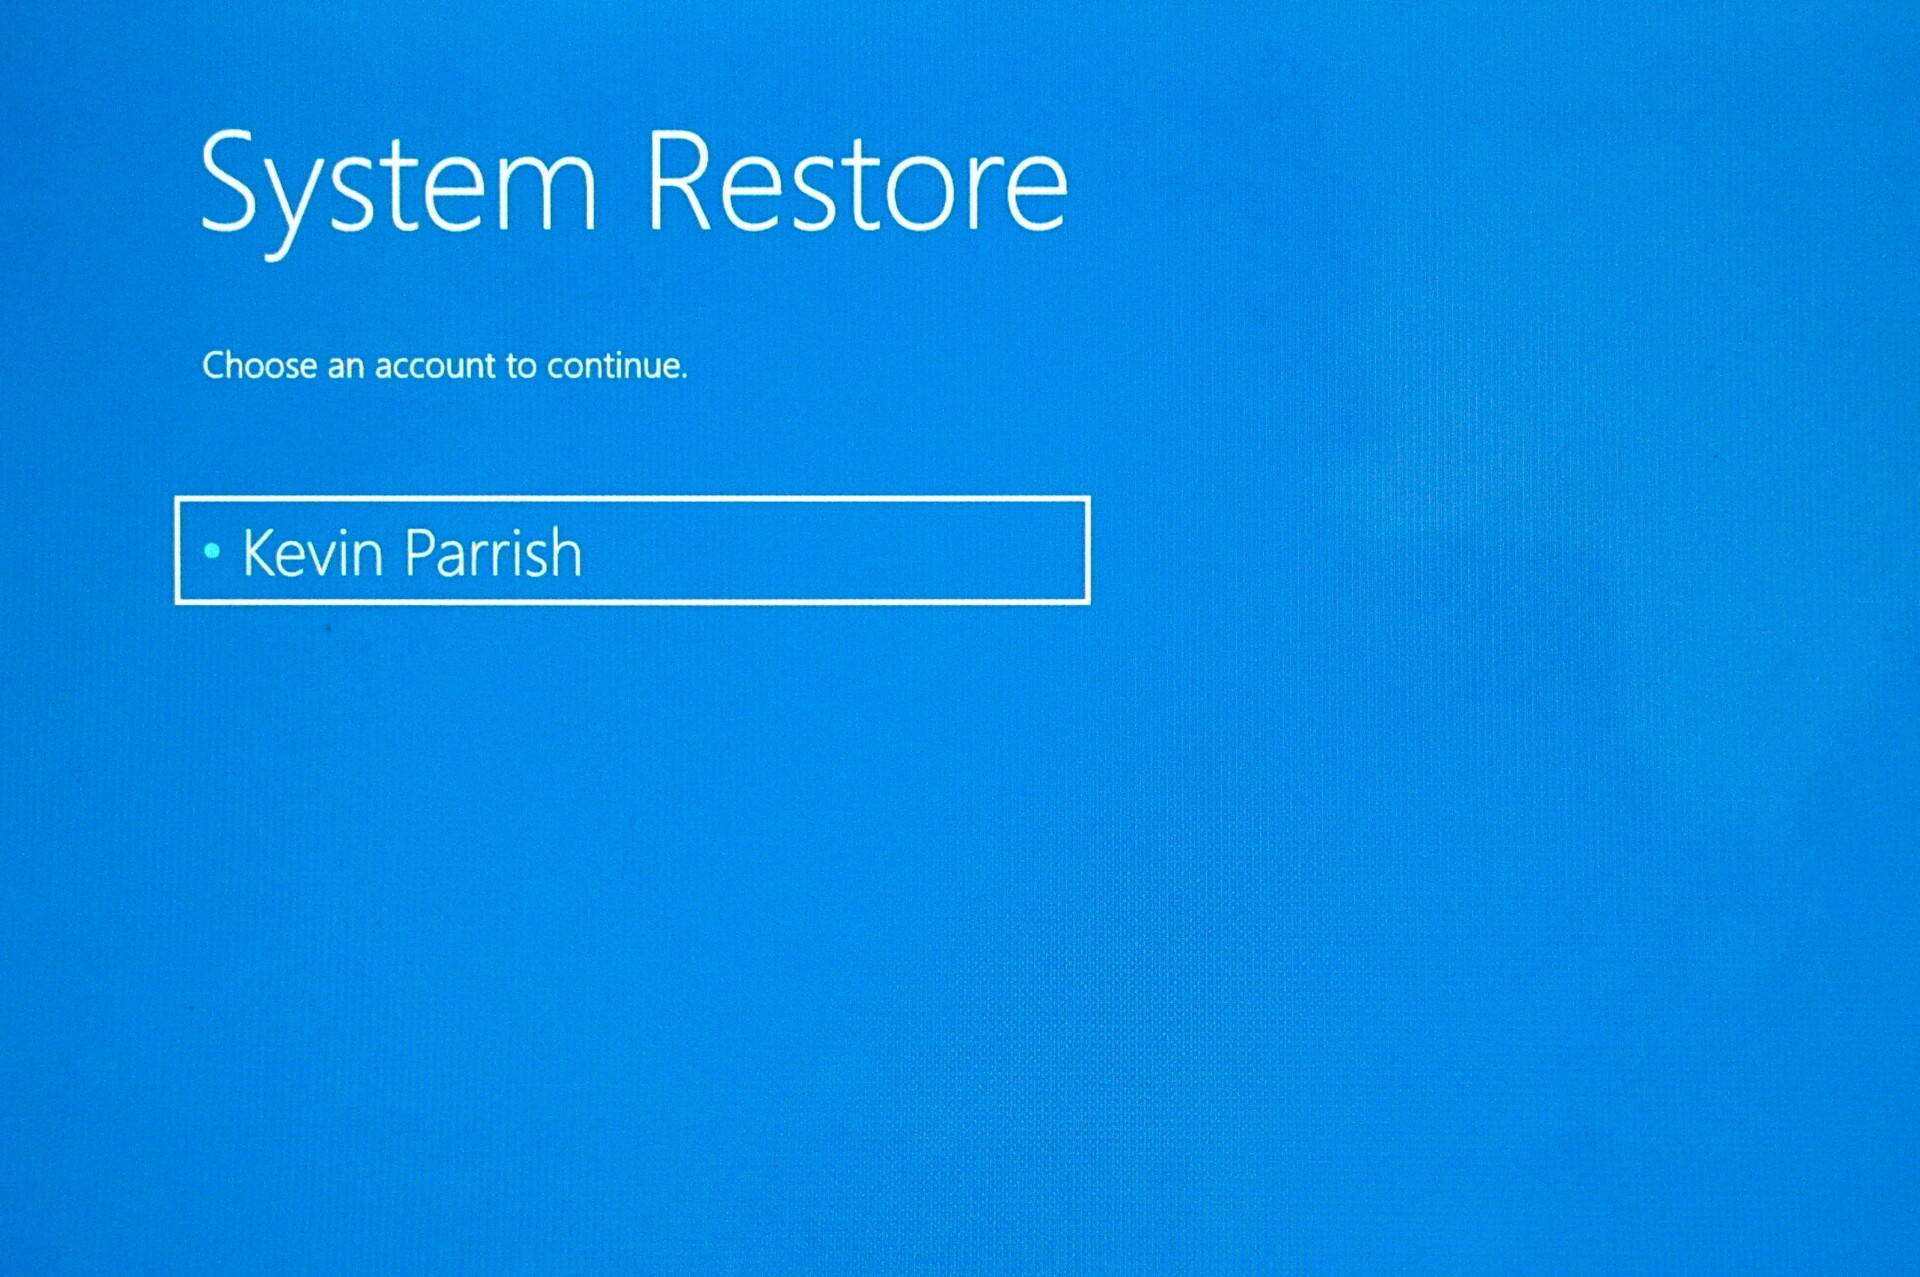 Windows 10 System Restore - how to do a System Restore on Windows 10